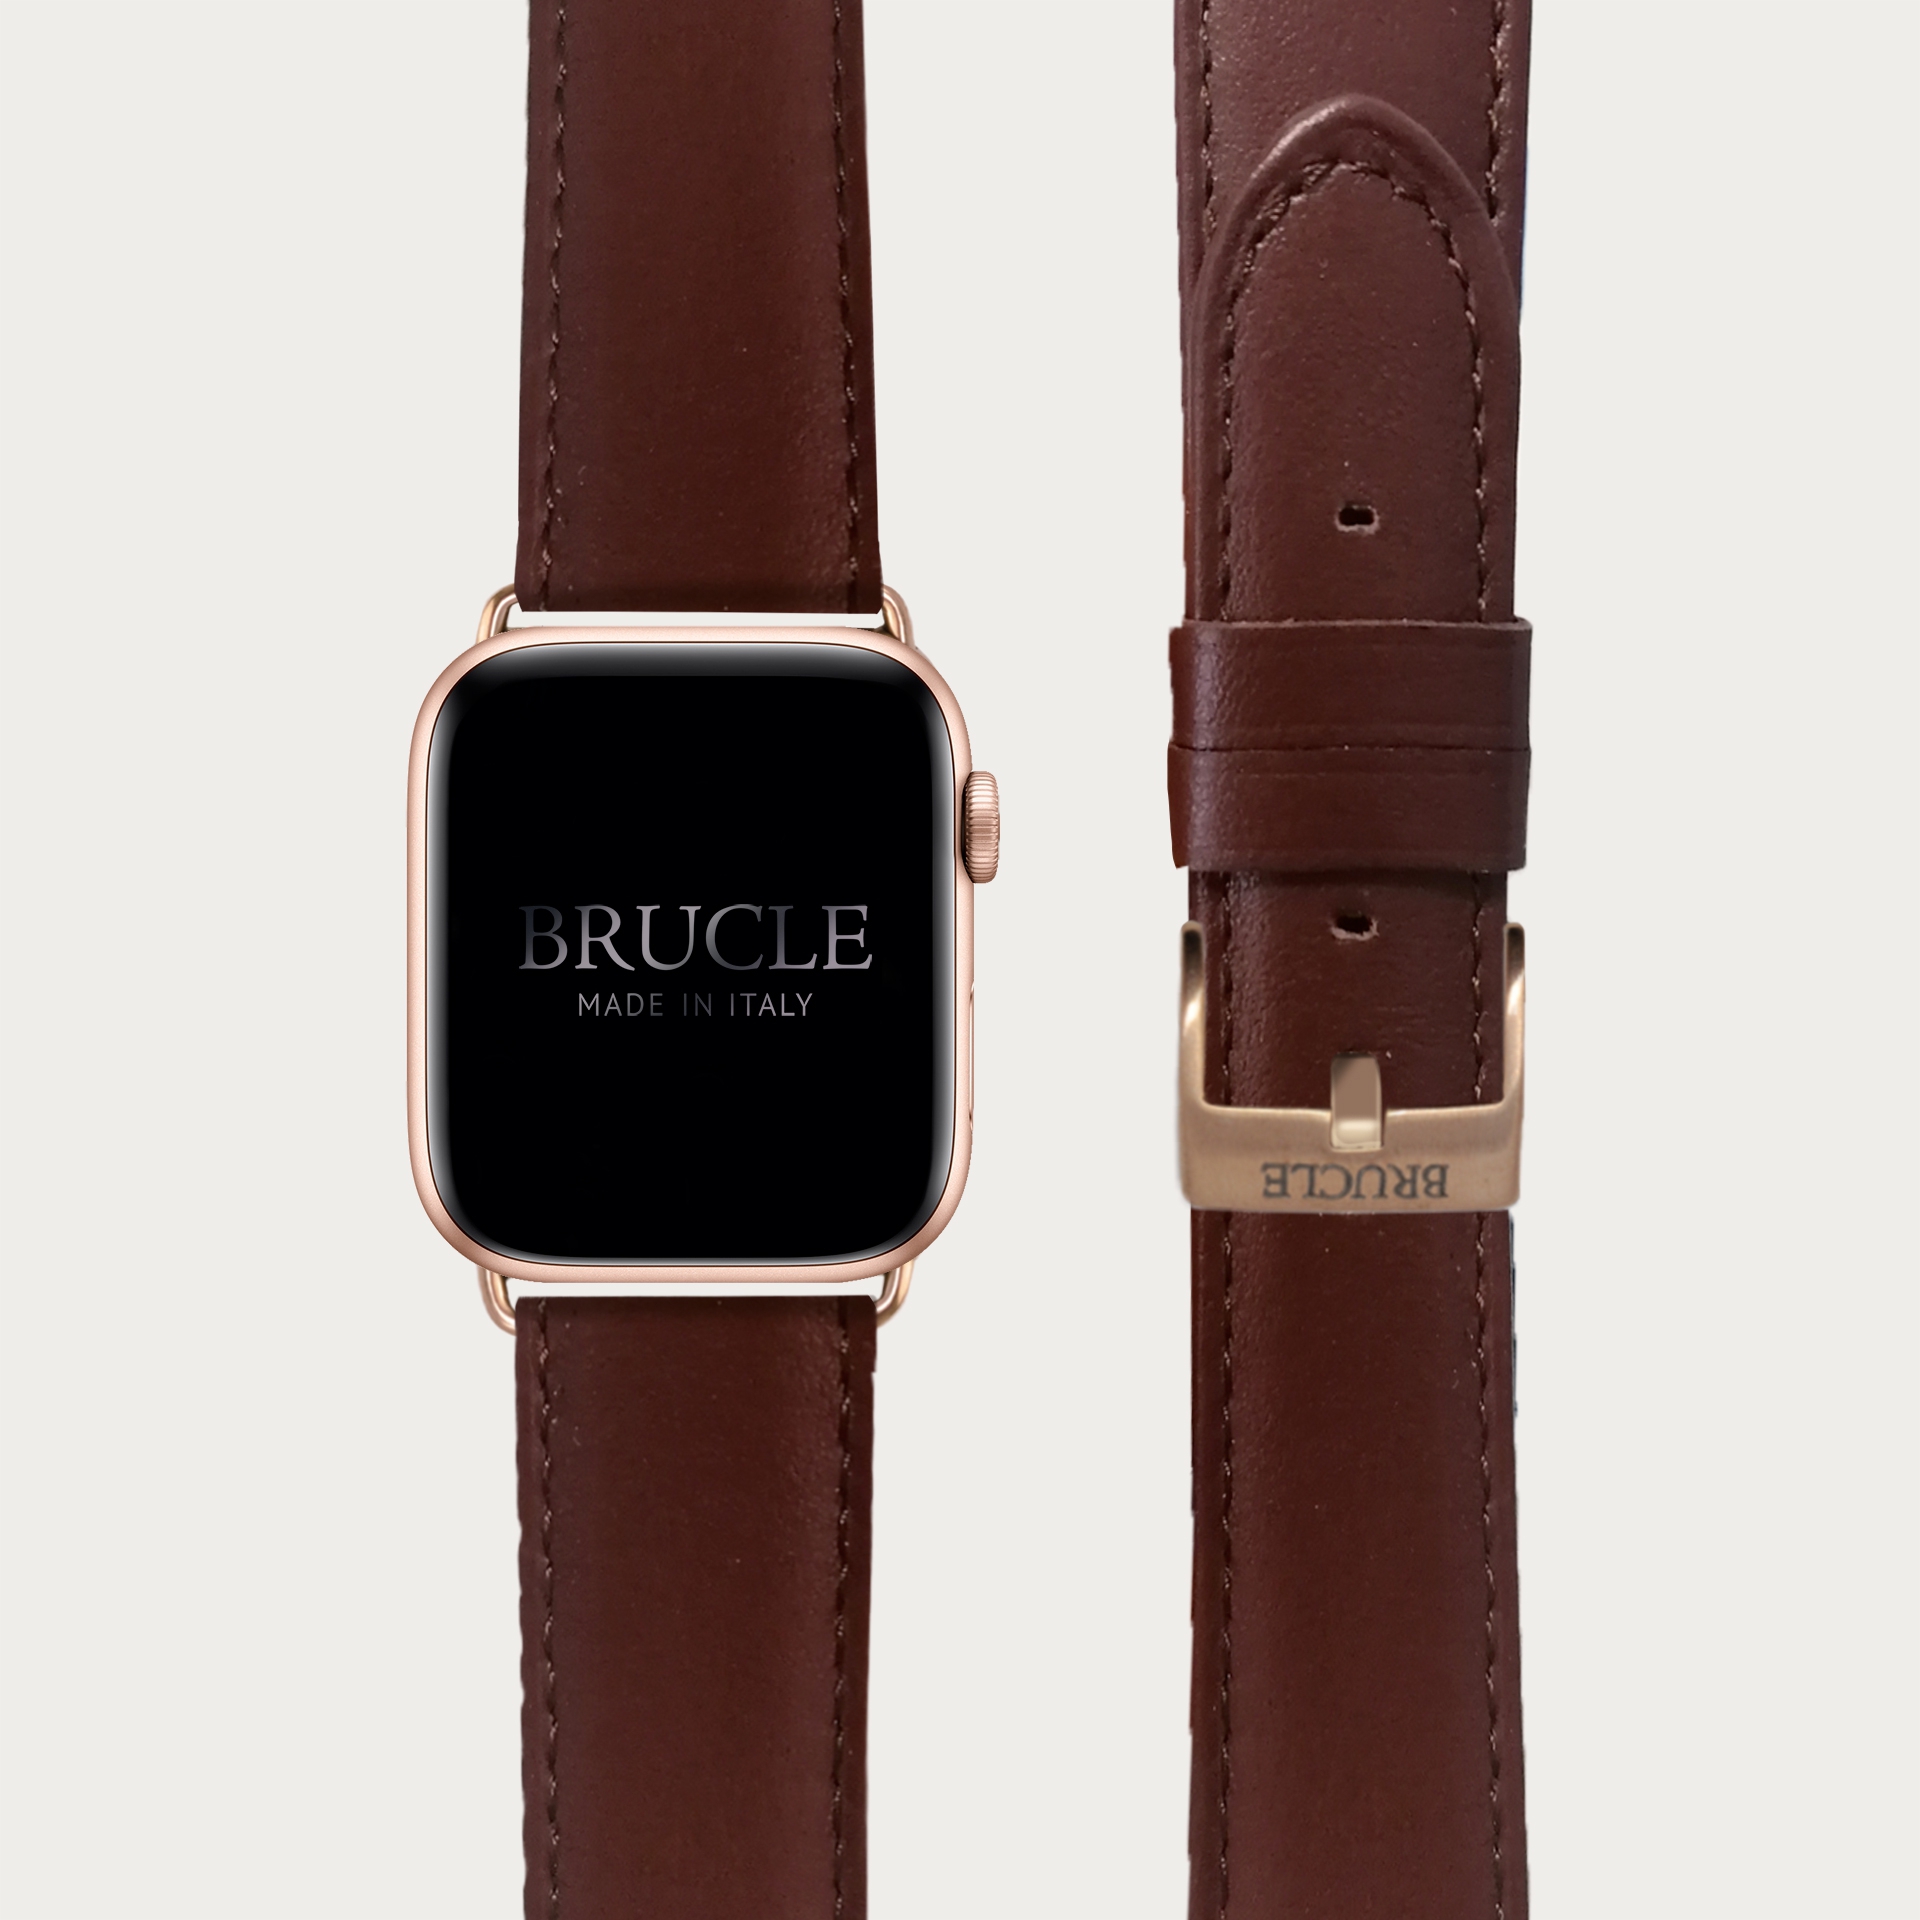 Leather Watch band compatible with Apple Watch / Samsung smartwatch, brown "inglese"